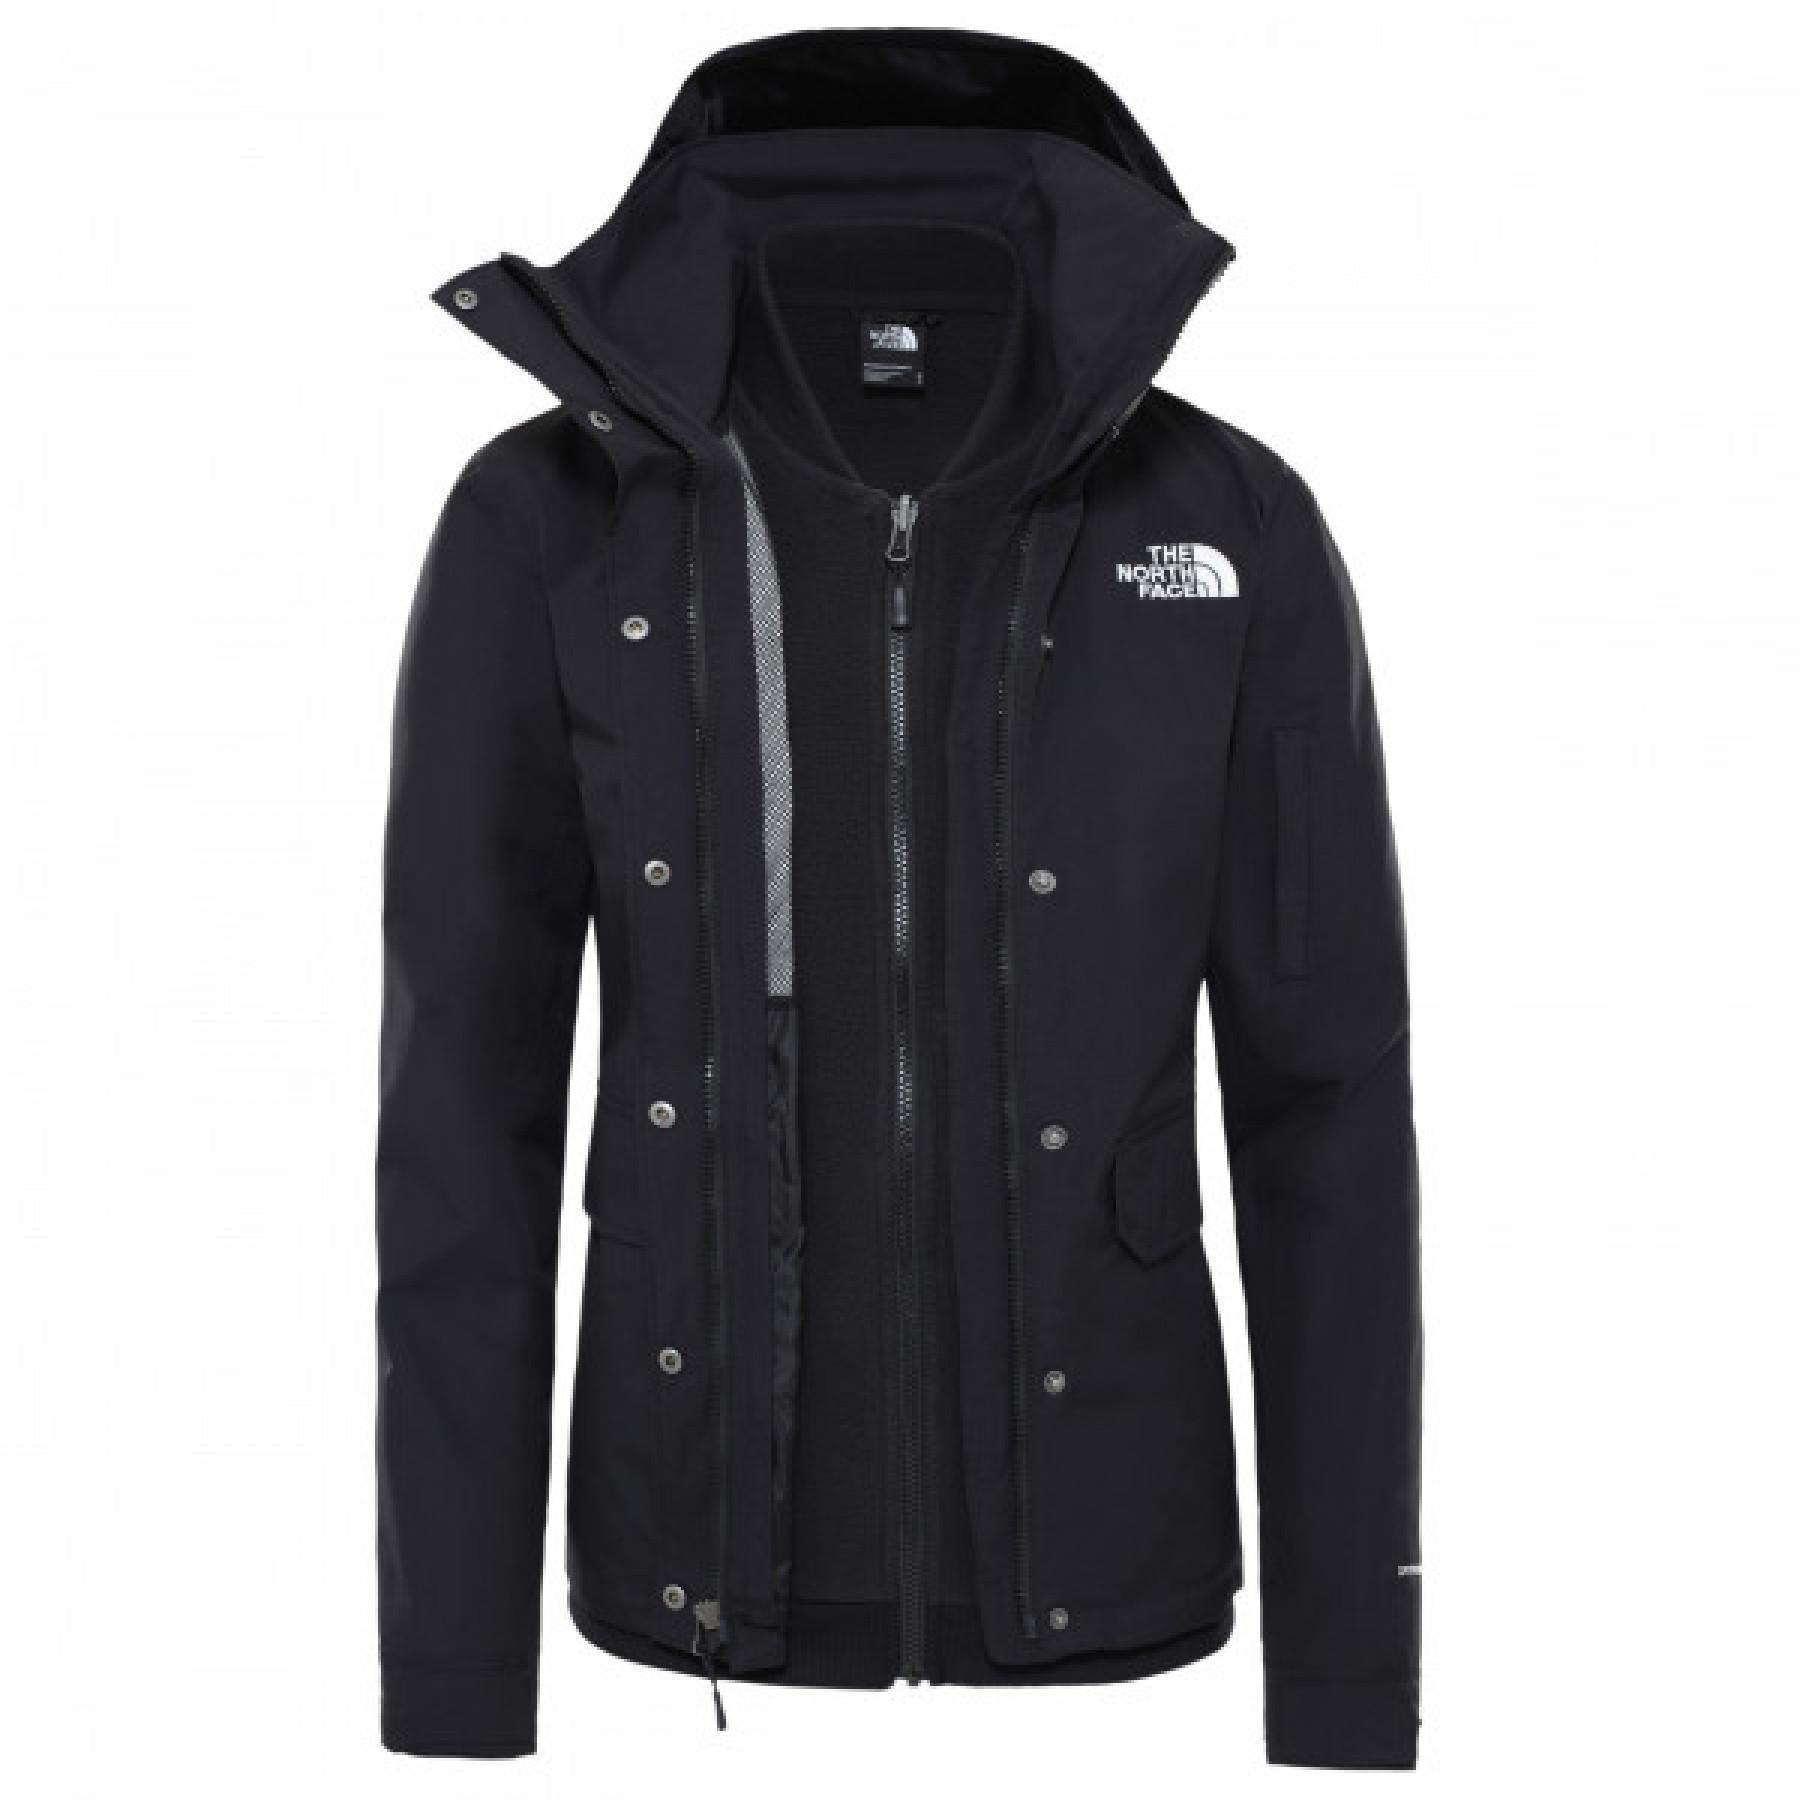 Giacca donna The North Face Pinecroft Triclimate